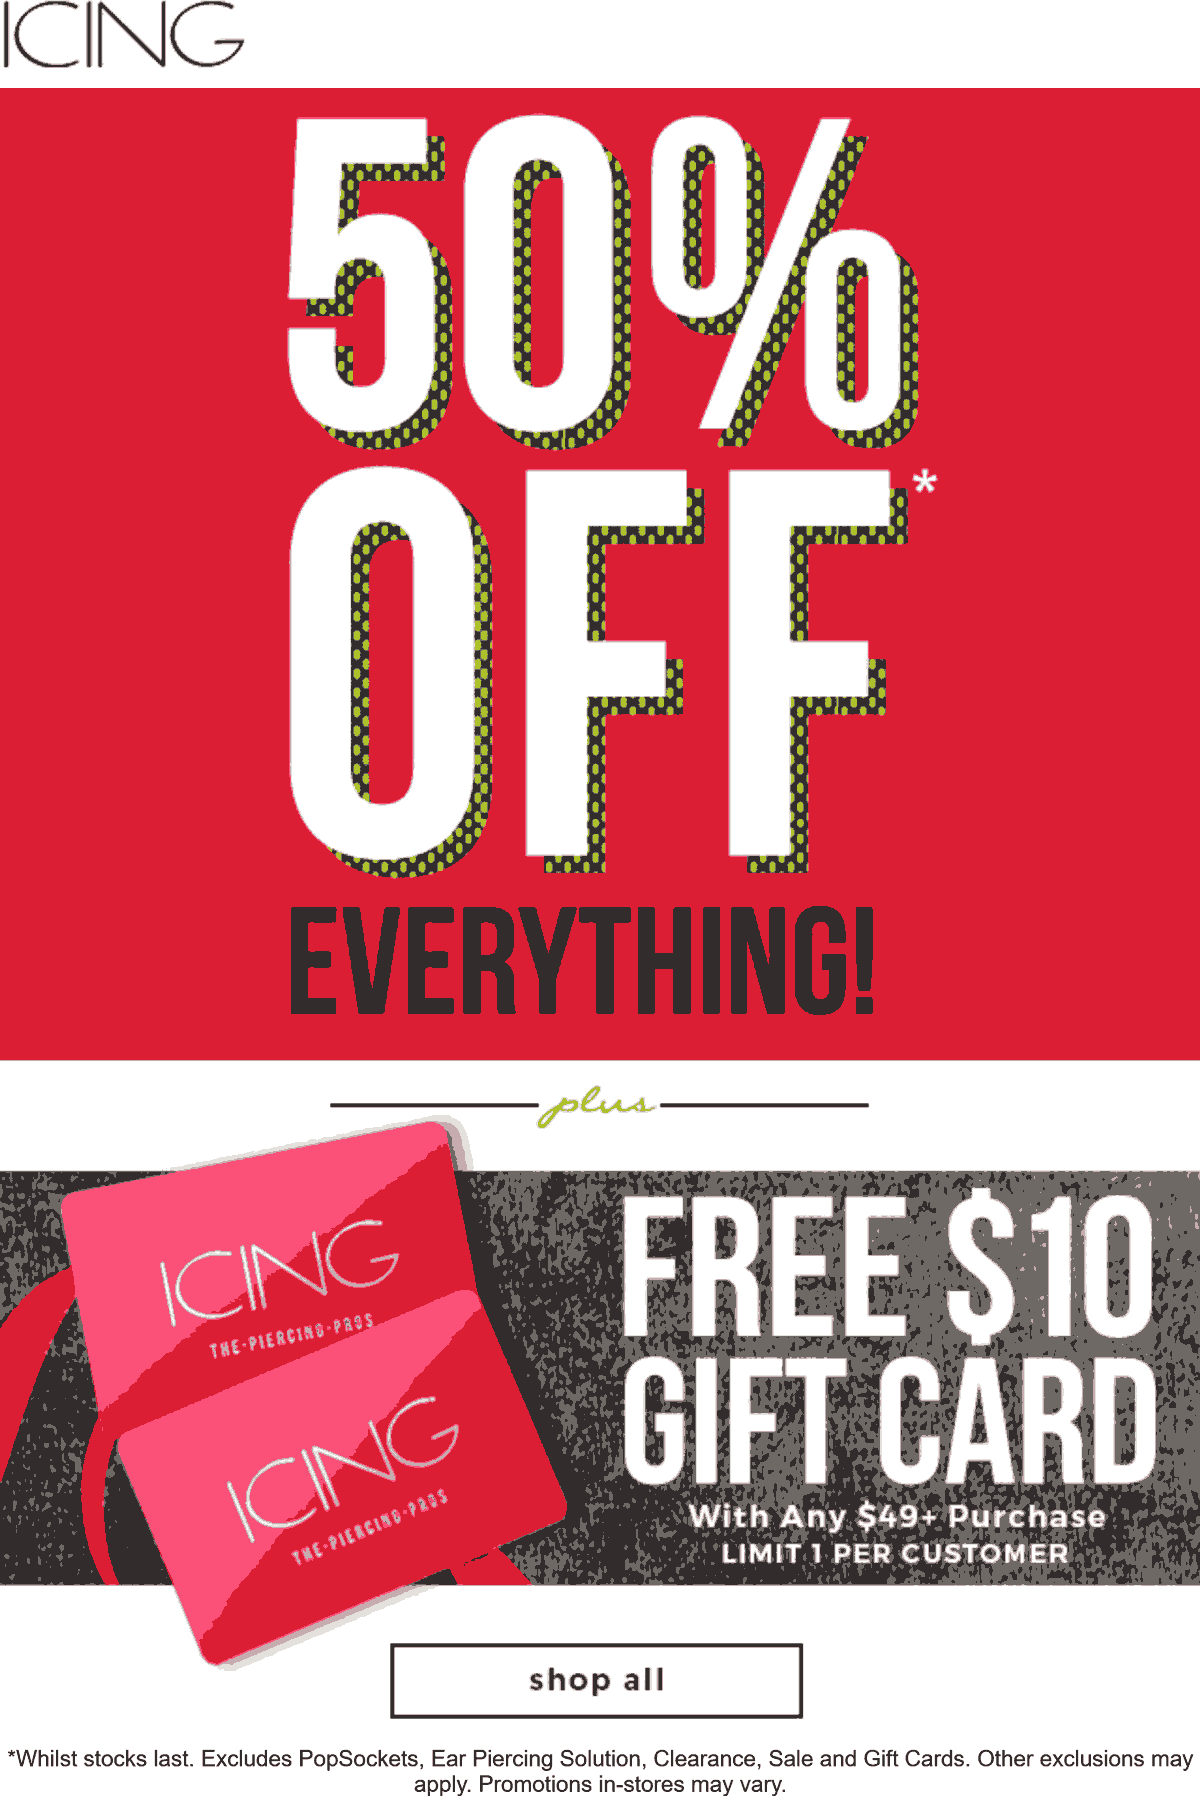 Icing stores Coupon  50% off everything online today at Icing fashion accessories #icing 